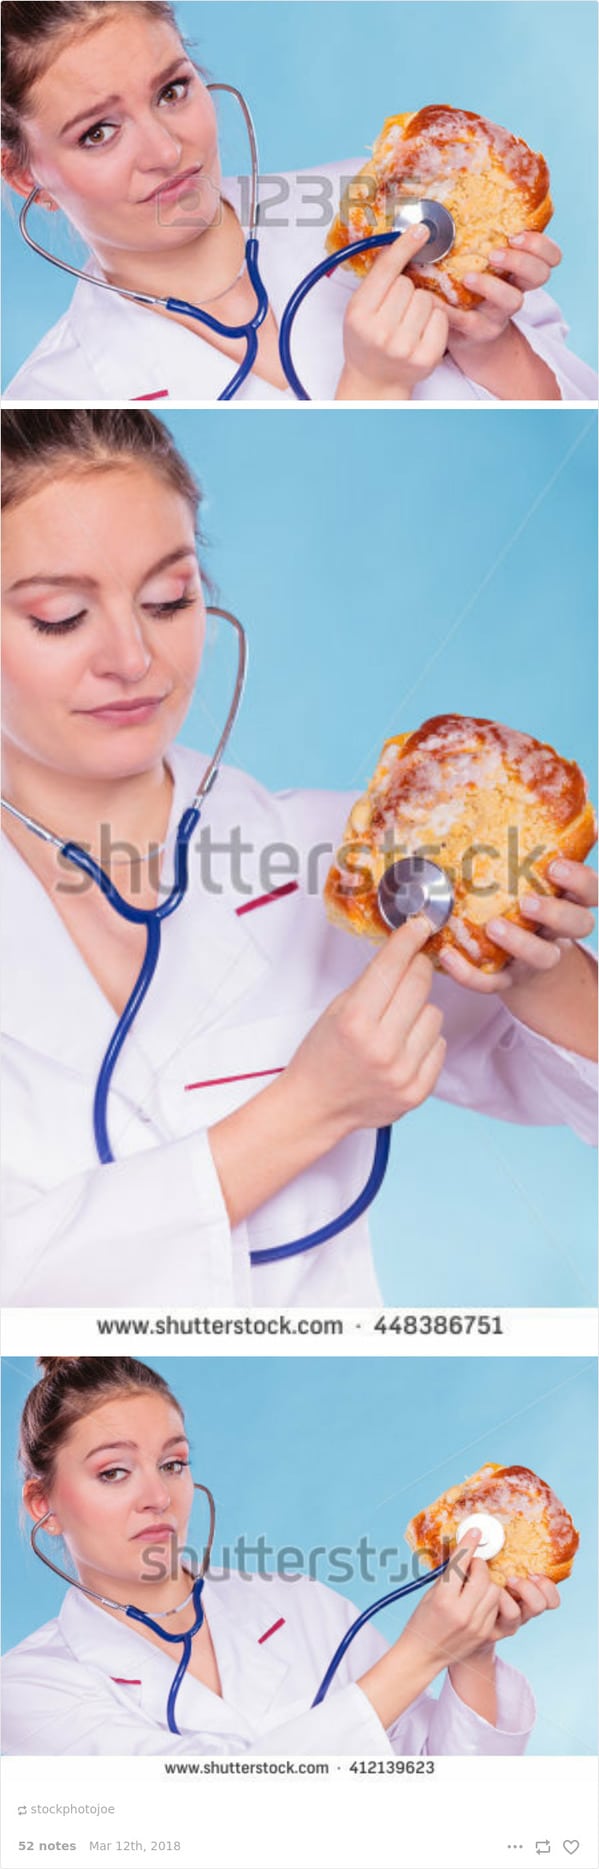 WTF stock photos female doctor checking the vitals on a danish